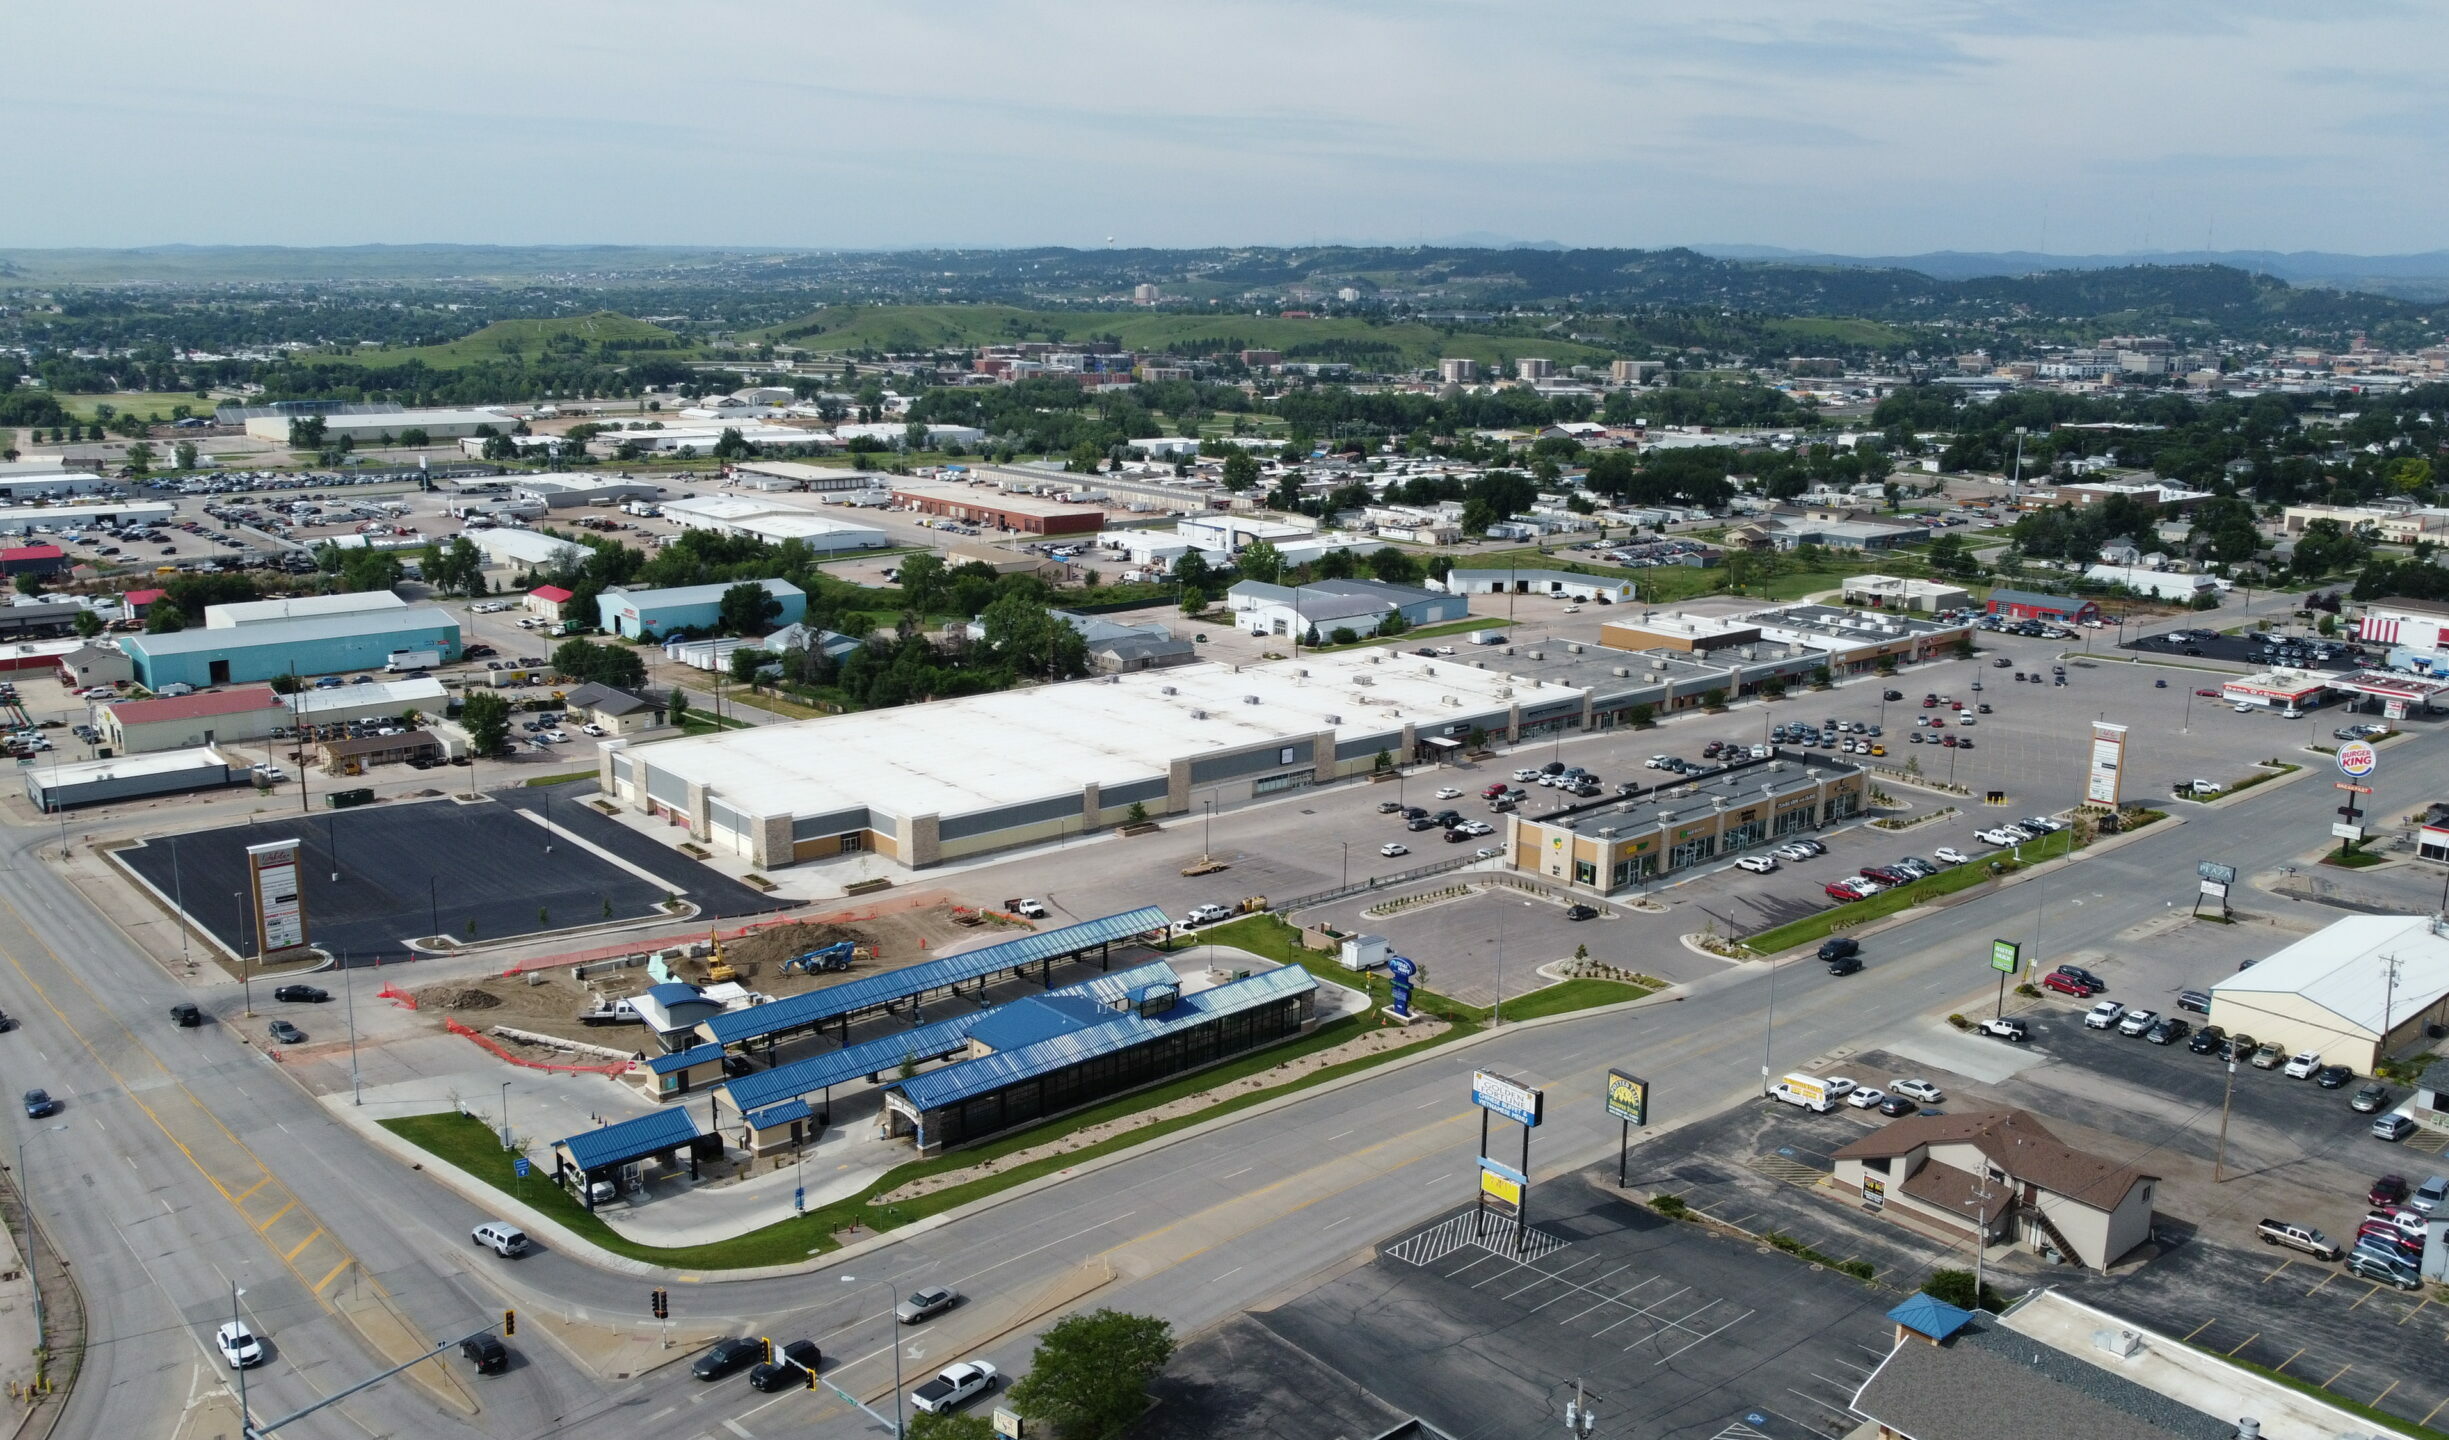 example of a redevelopment project, reworking an old Kmart into a new commercial hub